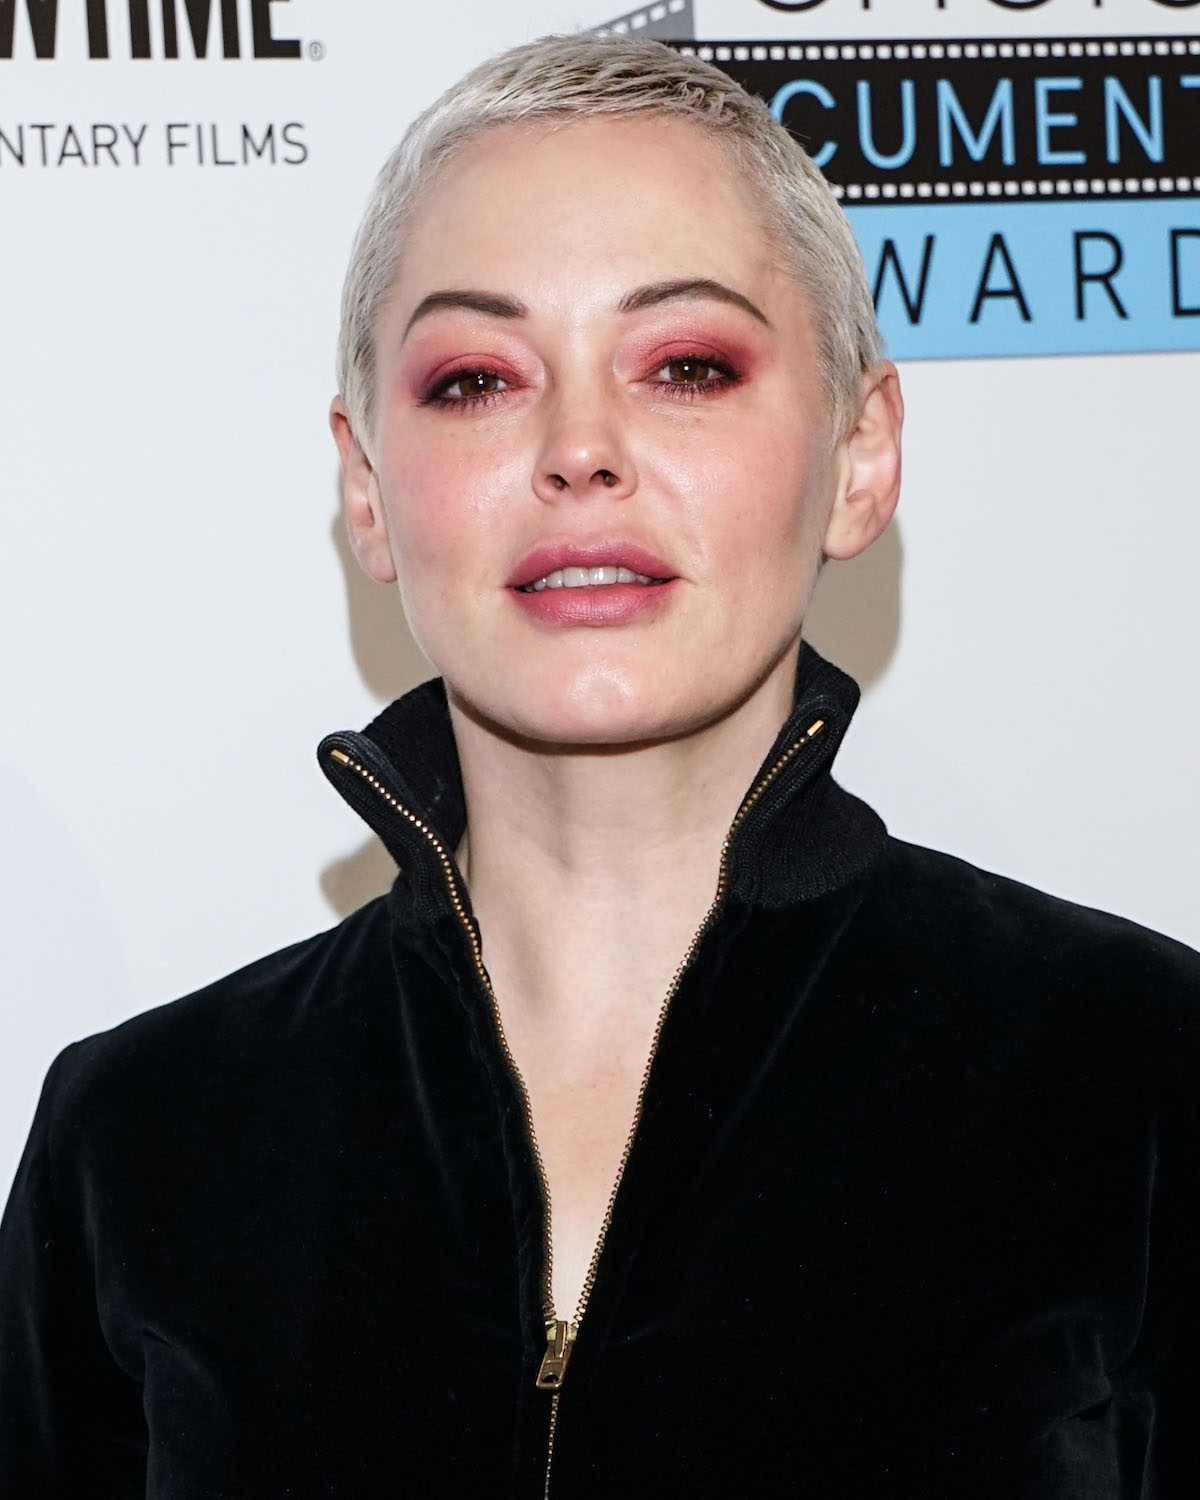 rose mcgowan's family history related to cults